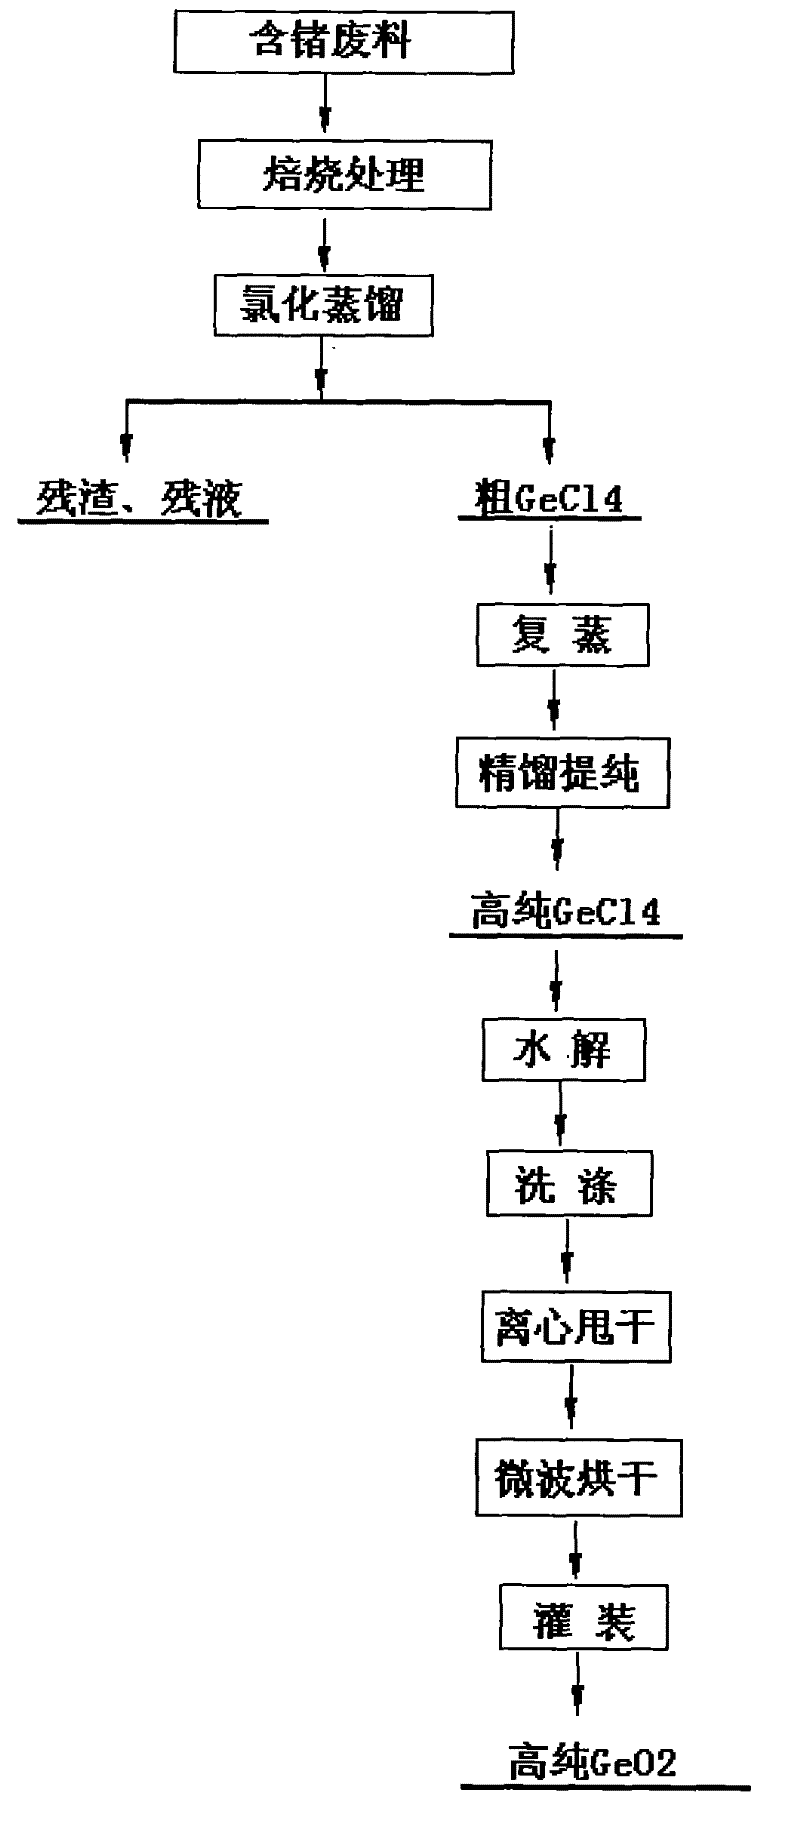 Production method of high-purity germanium dioxide